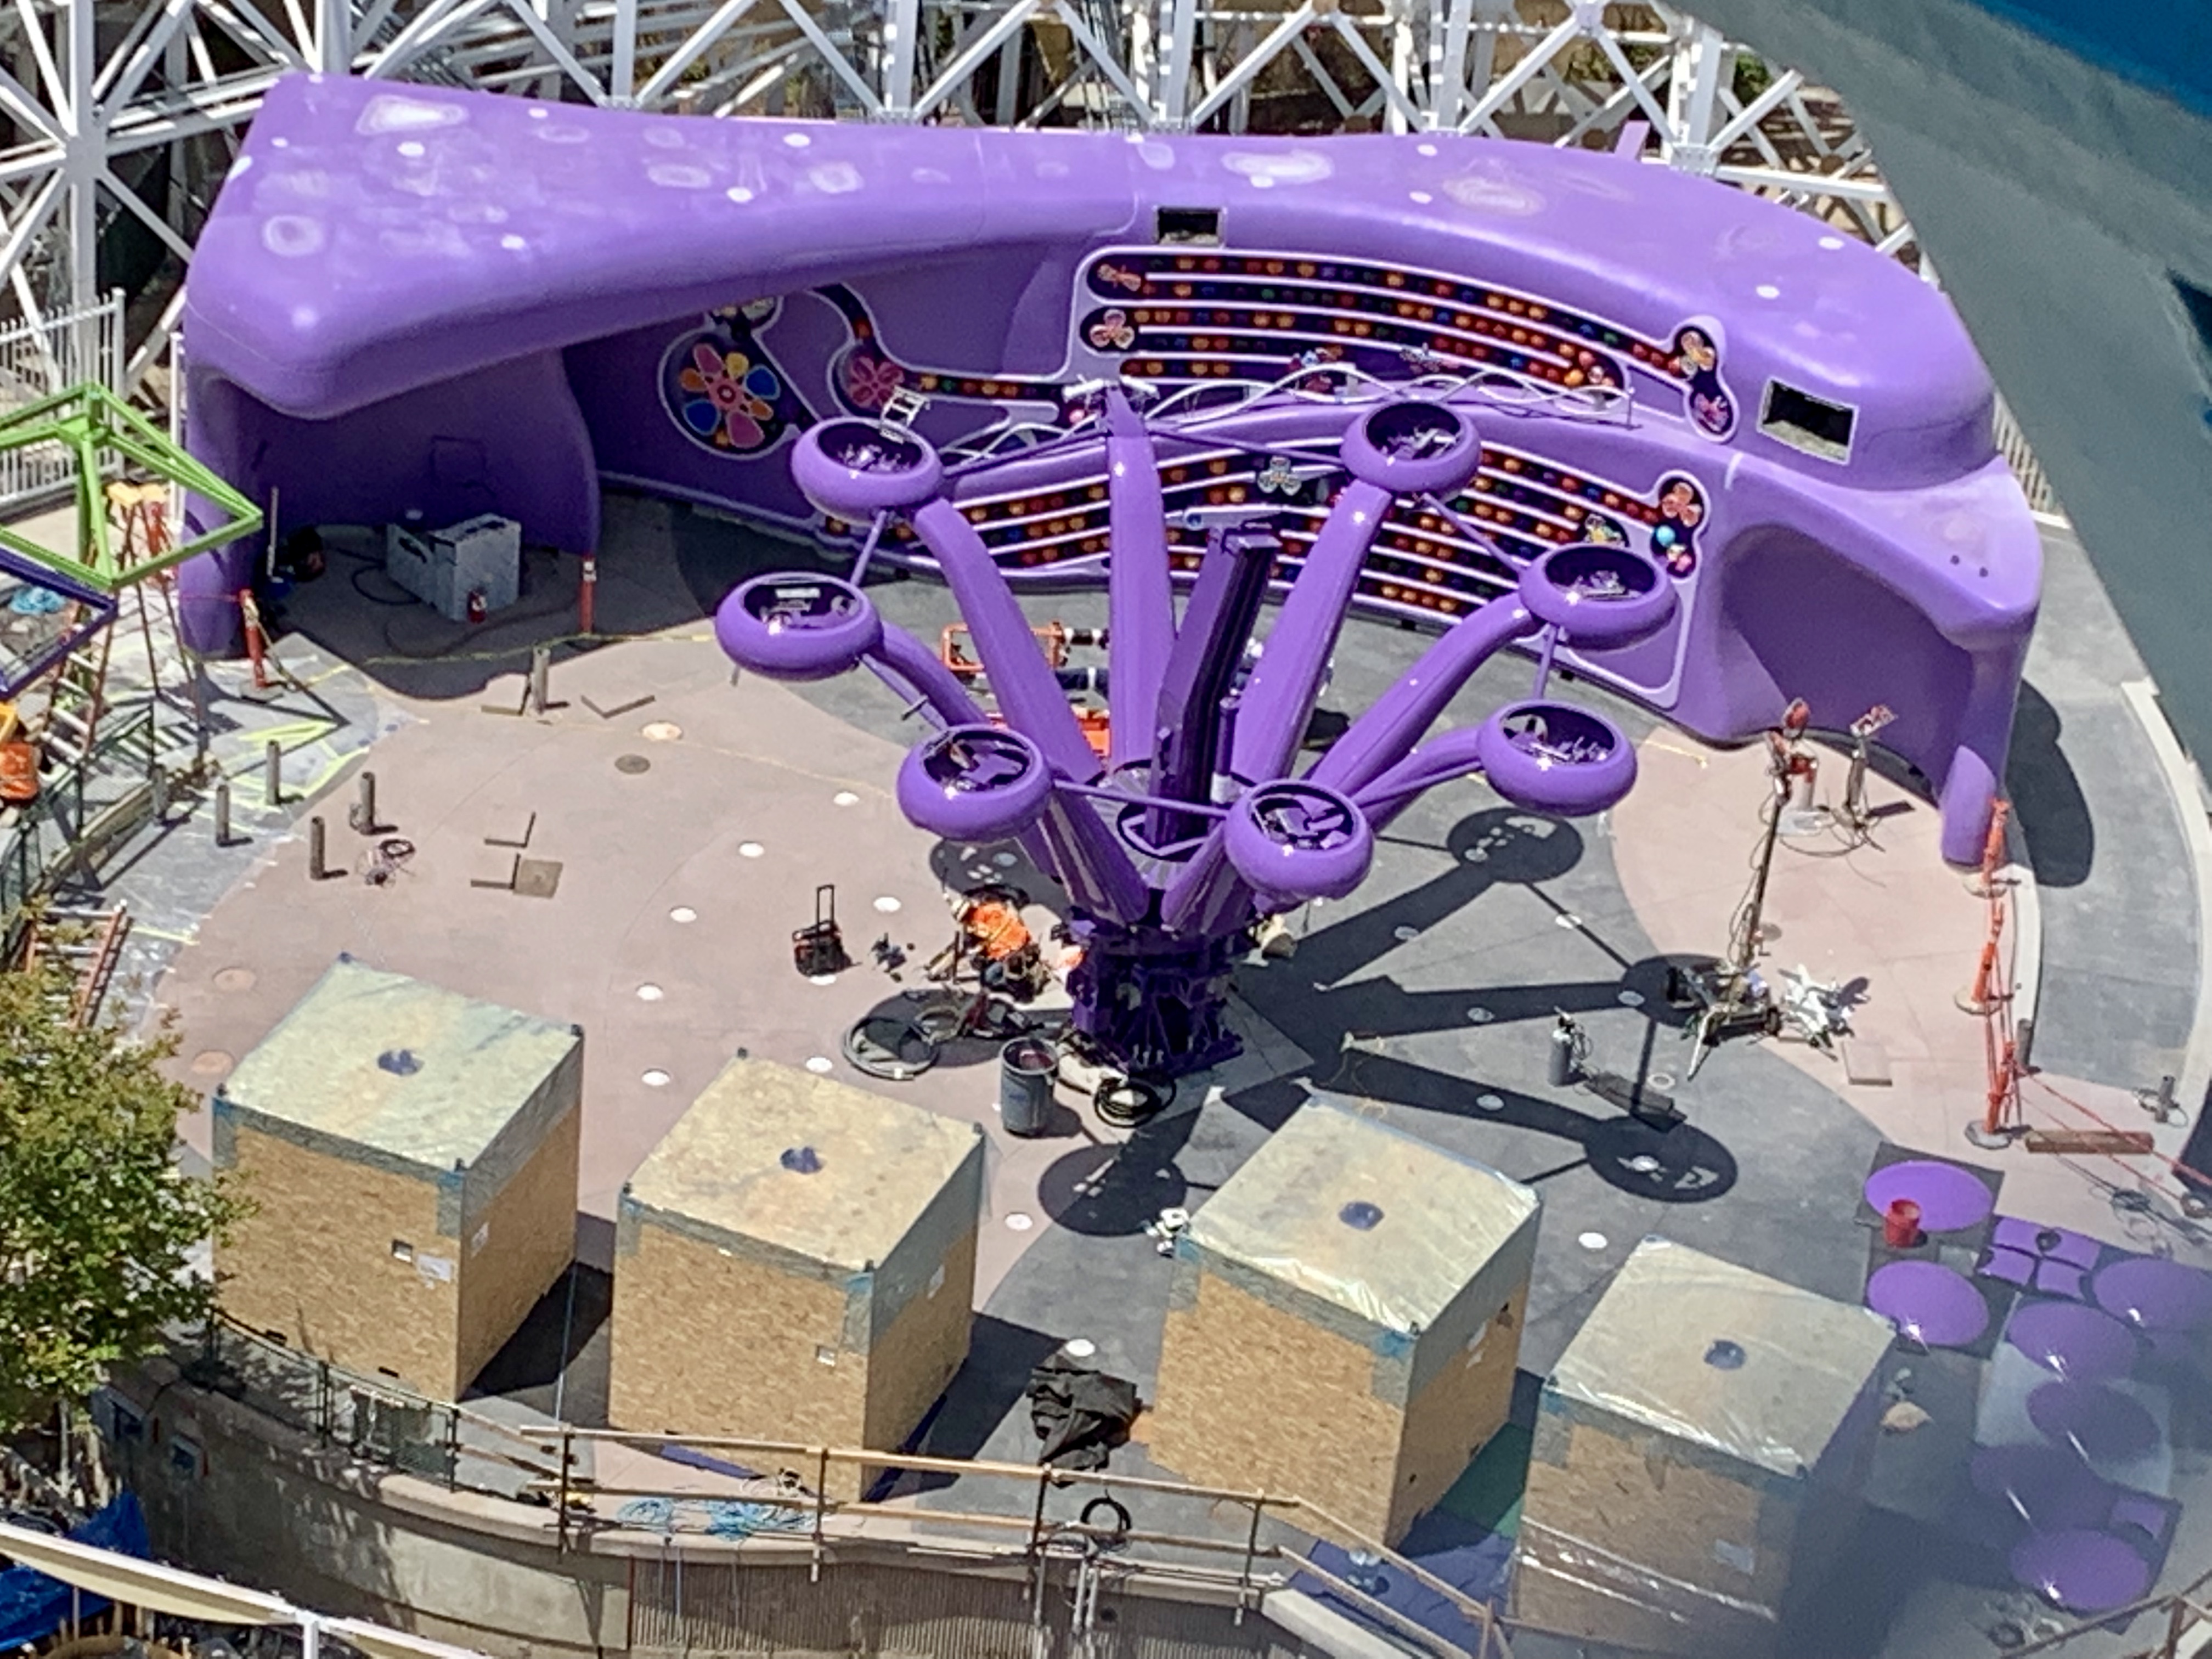 Photos Base Of Attraction Installed And Four Boxed Vehicles Arrive For Inside Out Emotional Whirlwind Attraction At Disney California Adventure Wdw News Today